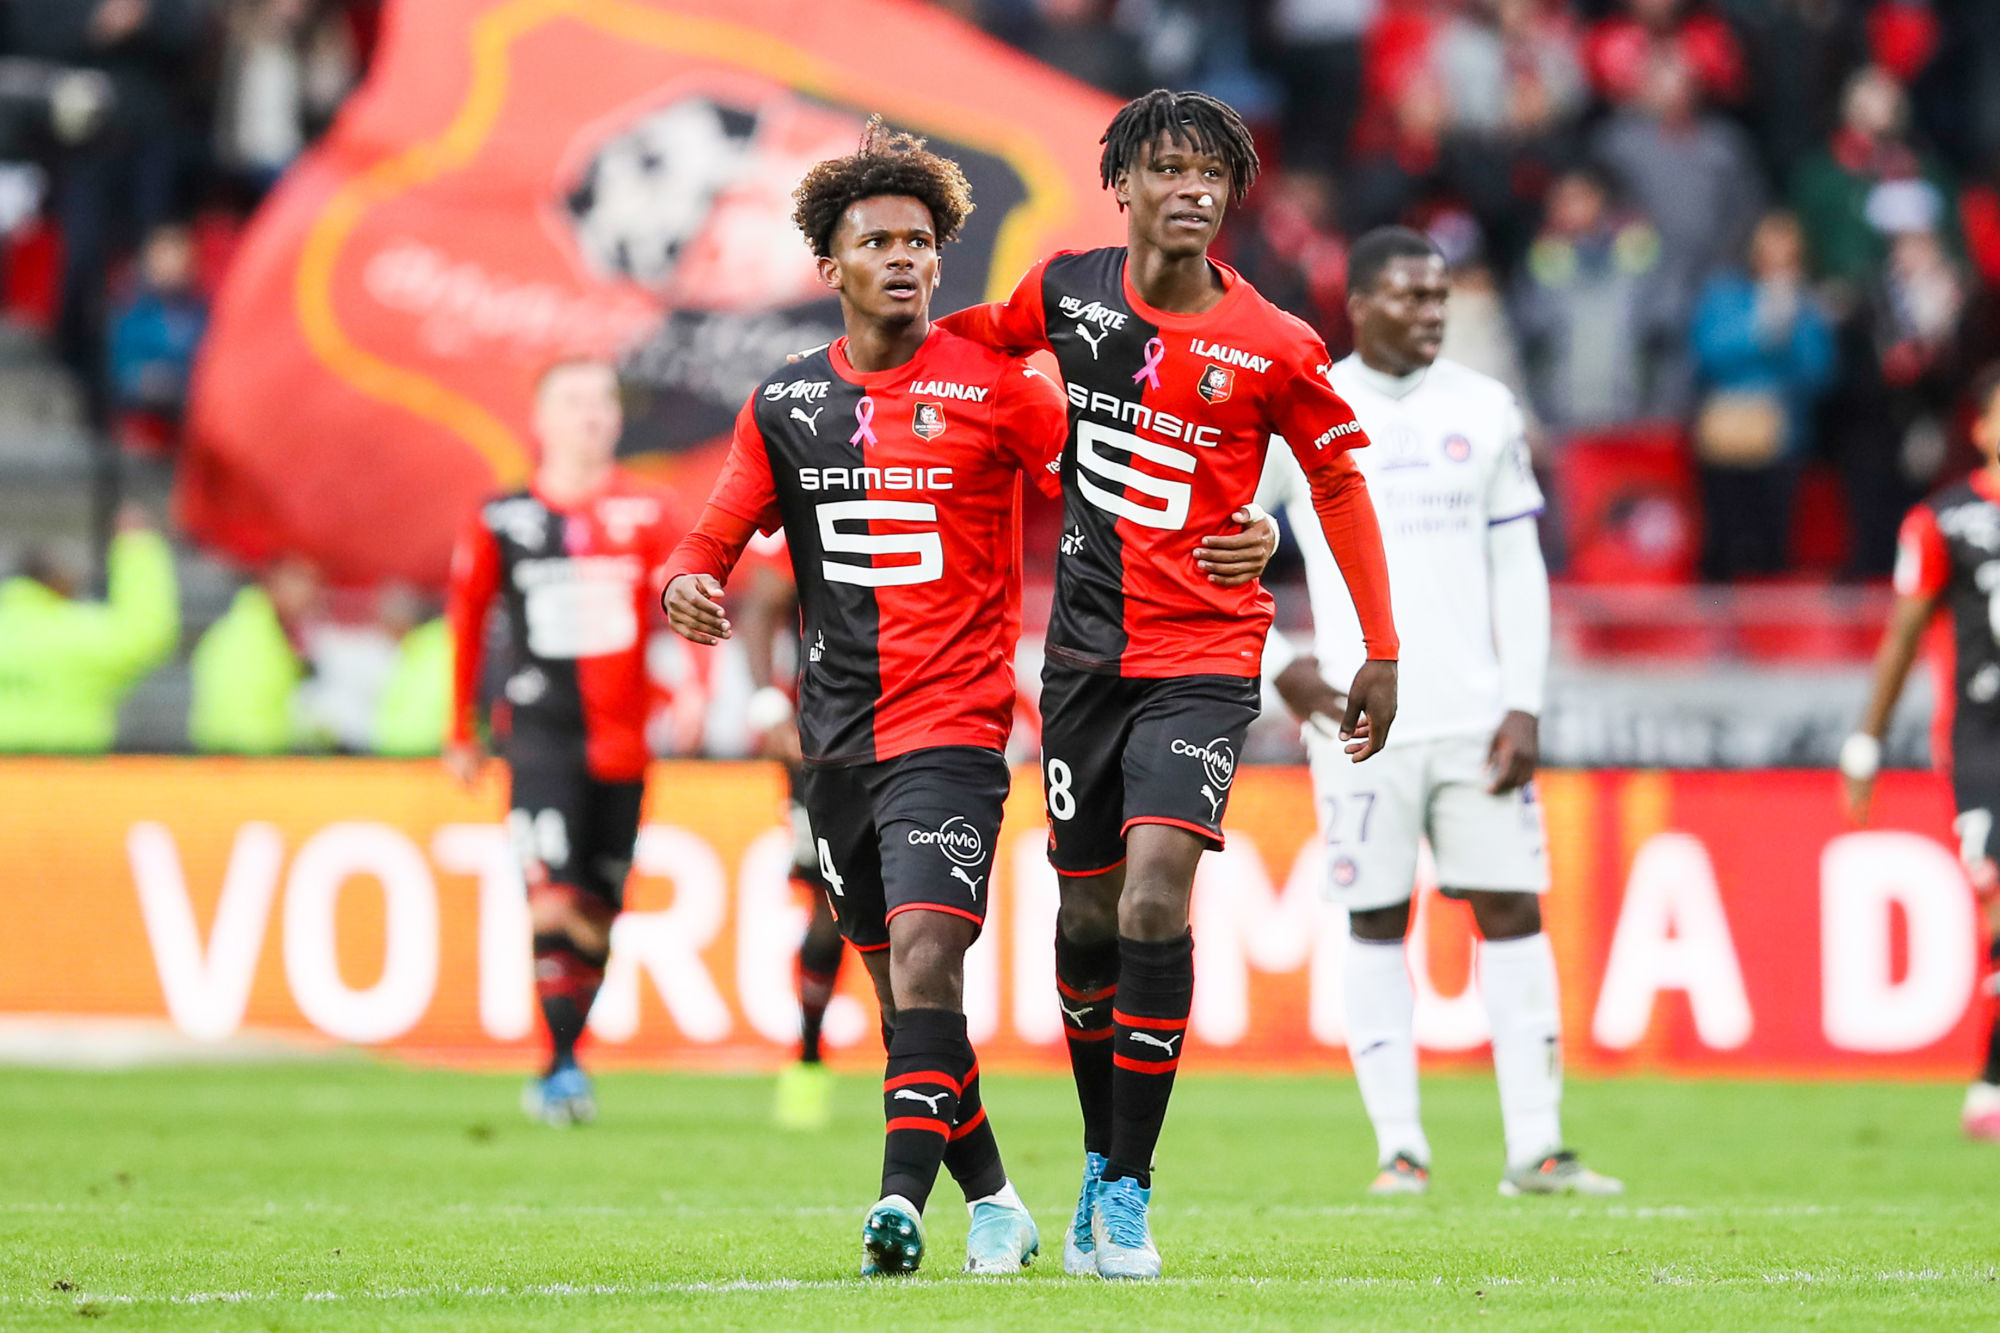 Yann GBOHO of Rennes celebrates with teammates after scoring the third goal during the Ligue 1 match between Rennes and Toulouse at Roazhon Park on October 27, 2019 in Rennes, France. (Photo by Vincent Michel/Icon Sport) - Yann GBOHO - Roazhon Park - Rennes (France)